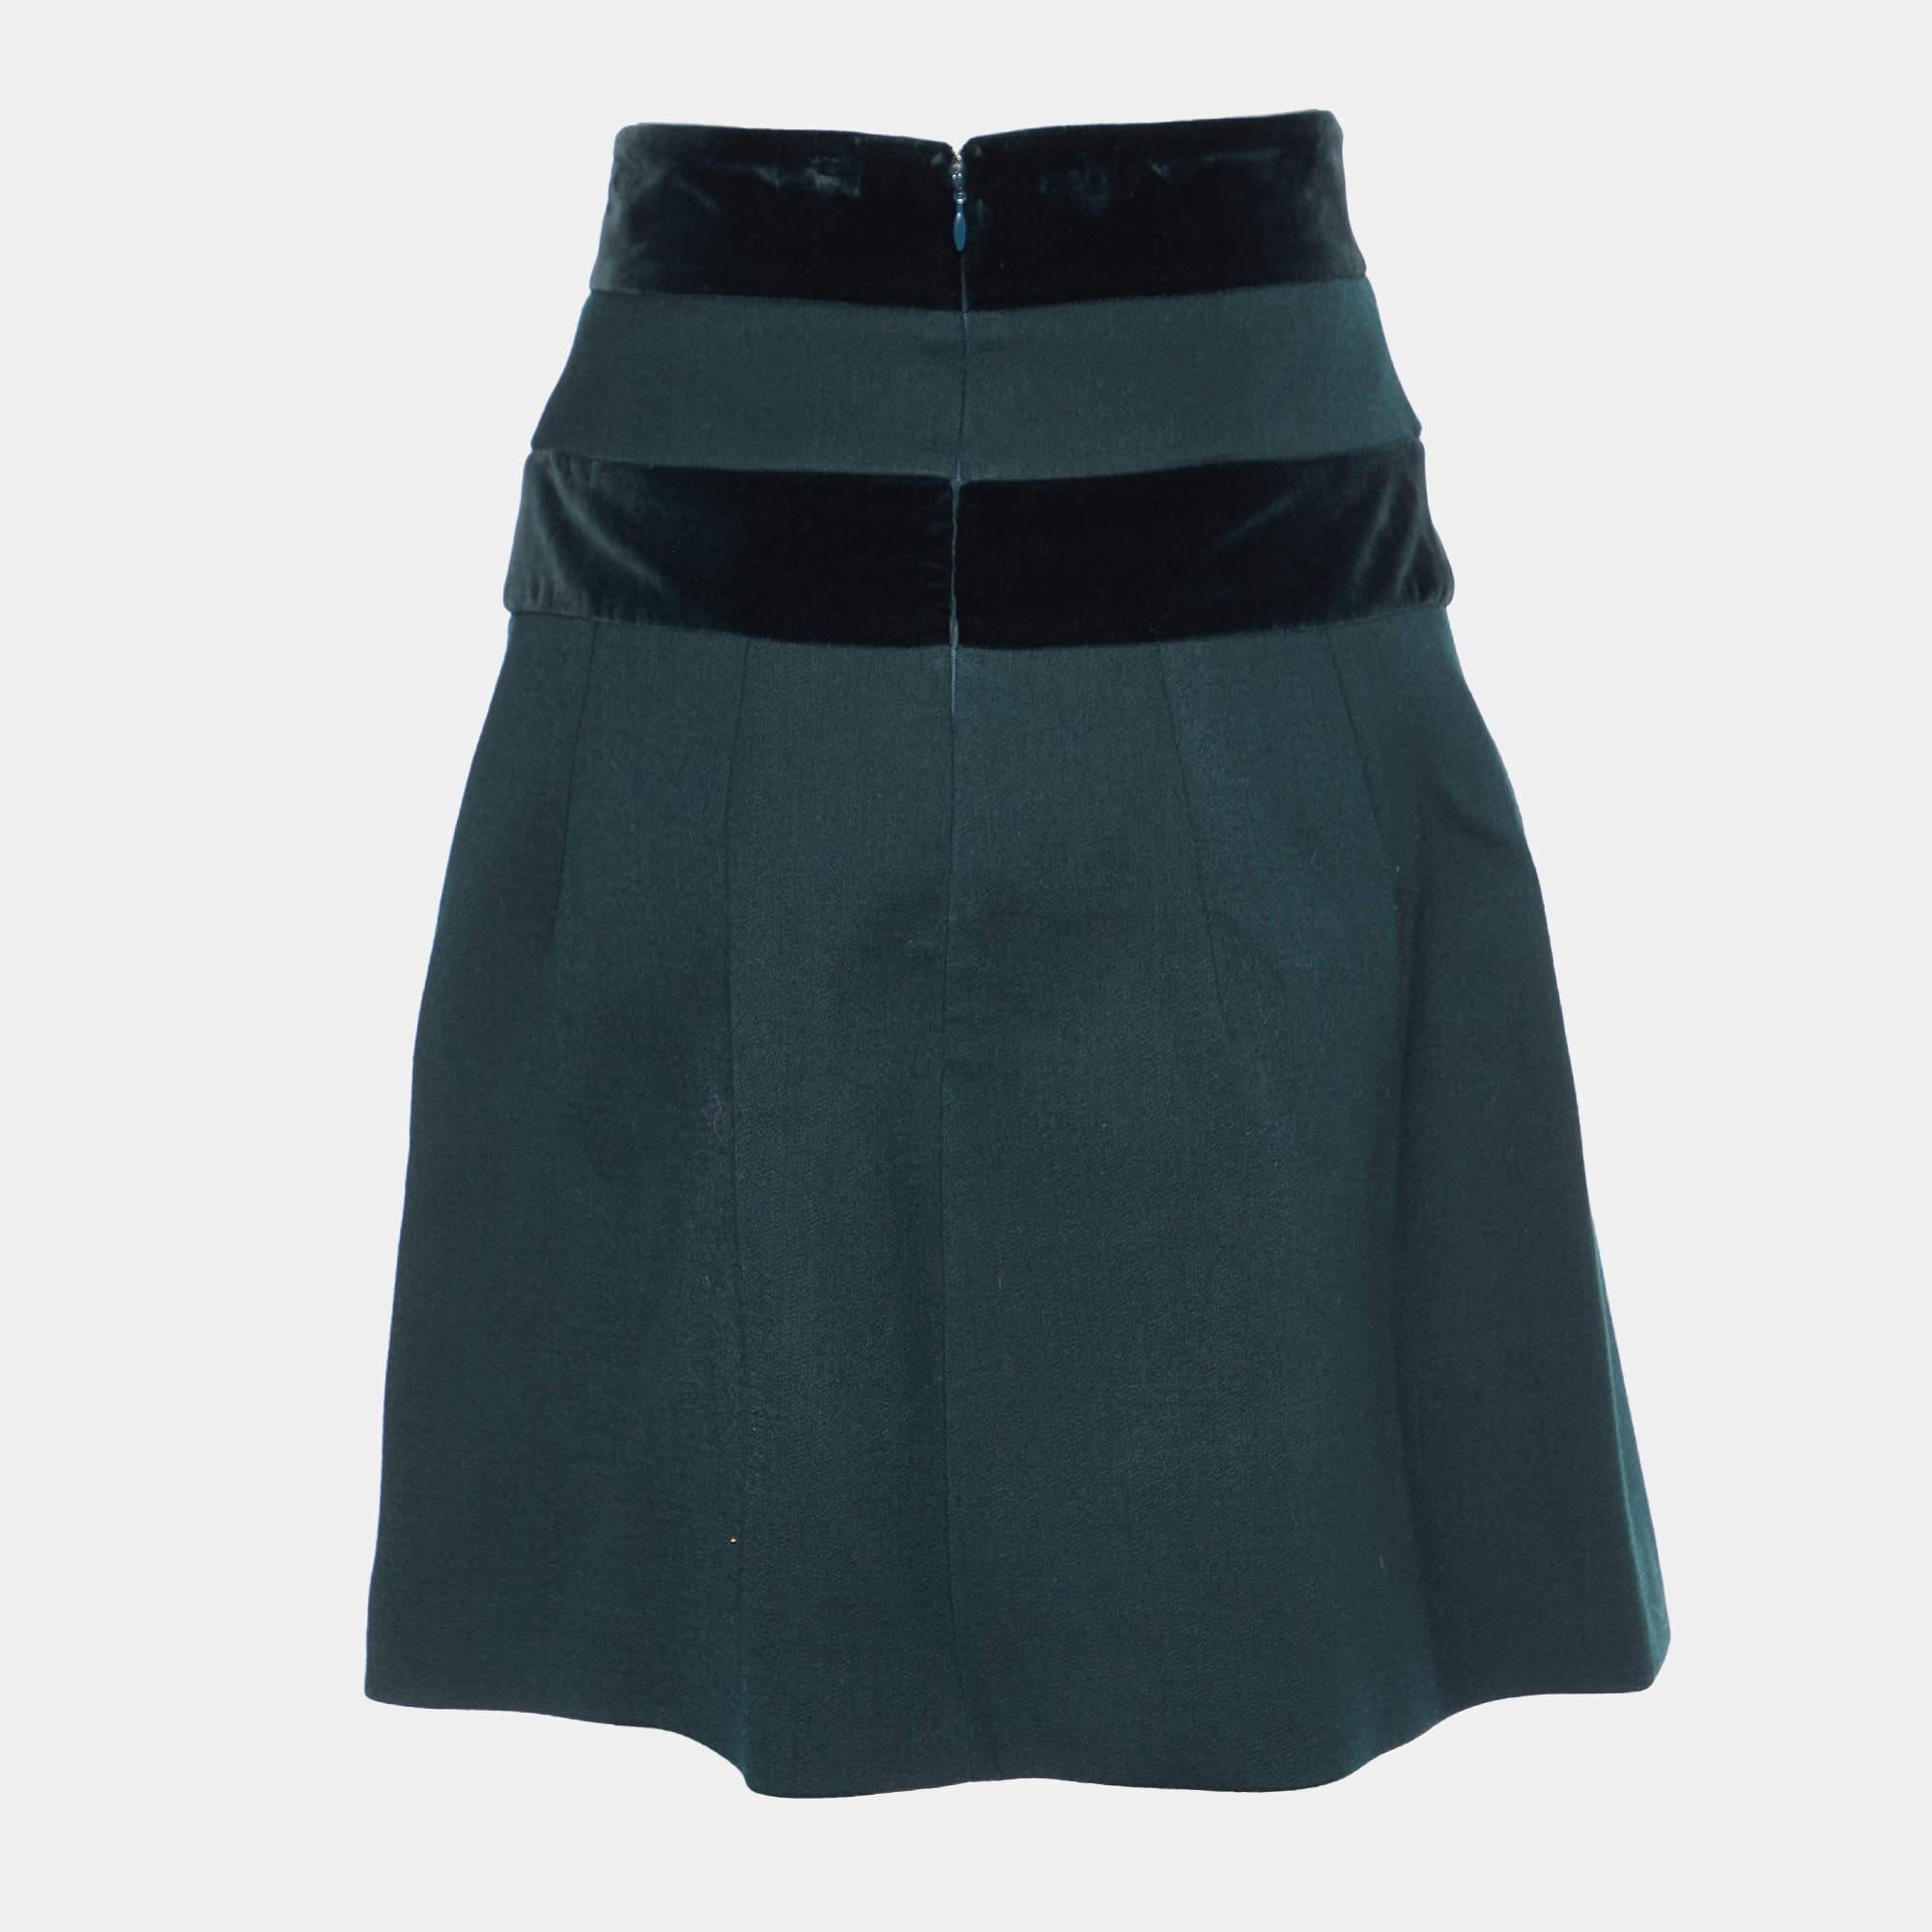 This elegant skirt is worth adding to your closet! Crafted from fine materials, it is exquisitely designed into a flattering shape.

Includes: Brand Tag